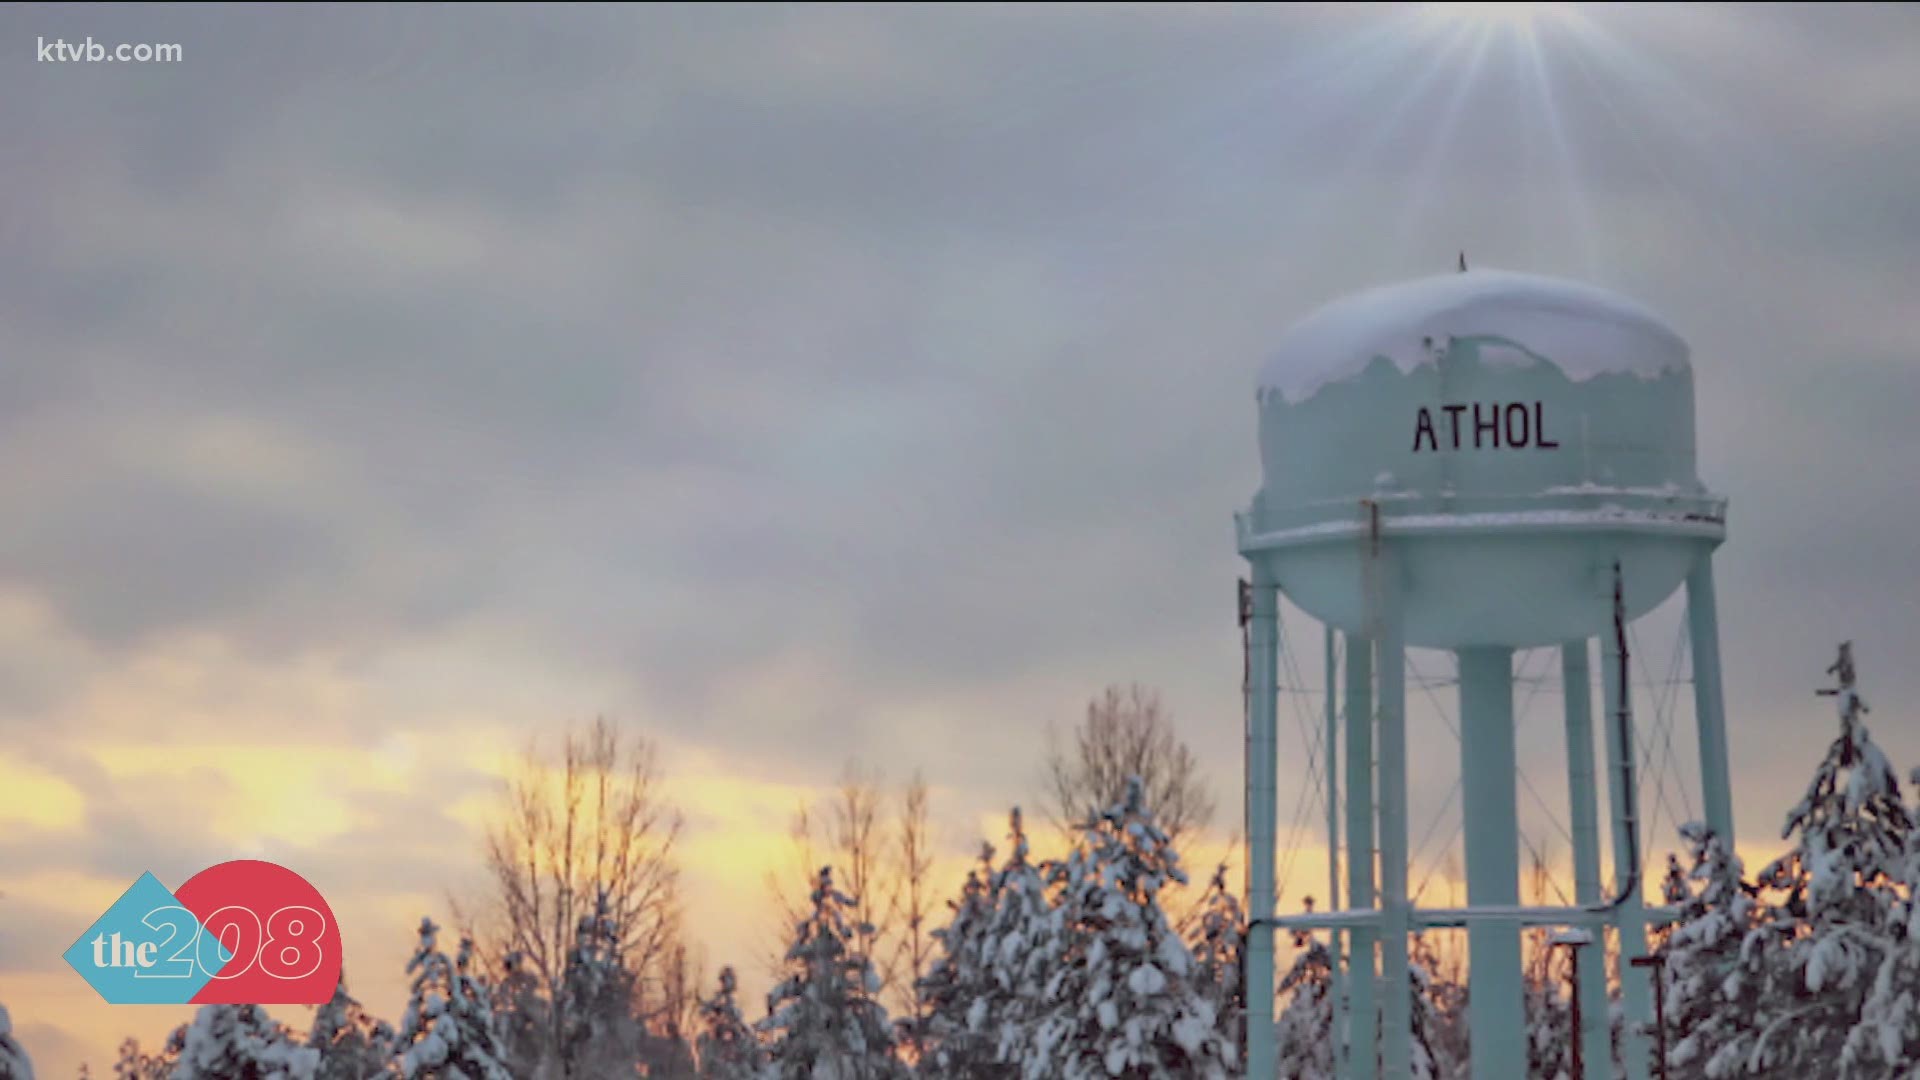 We reached out to the city's former mayor to learn about the history of Athol.